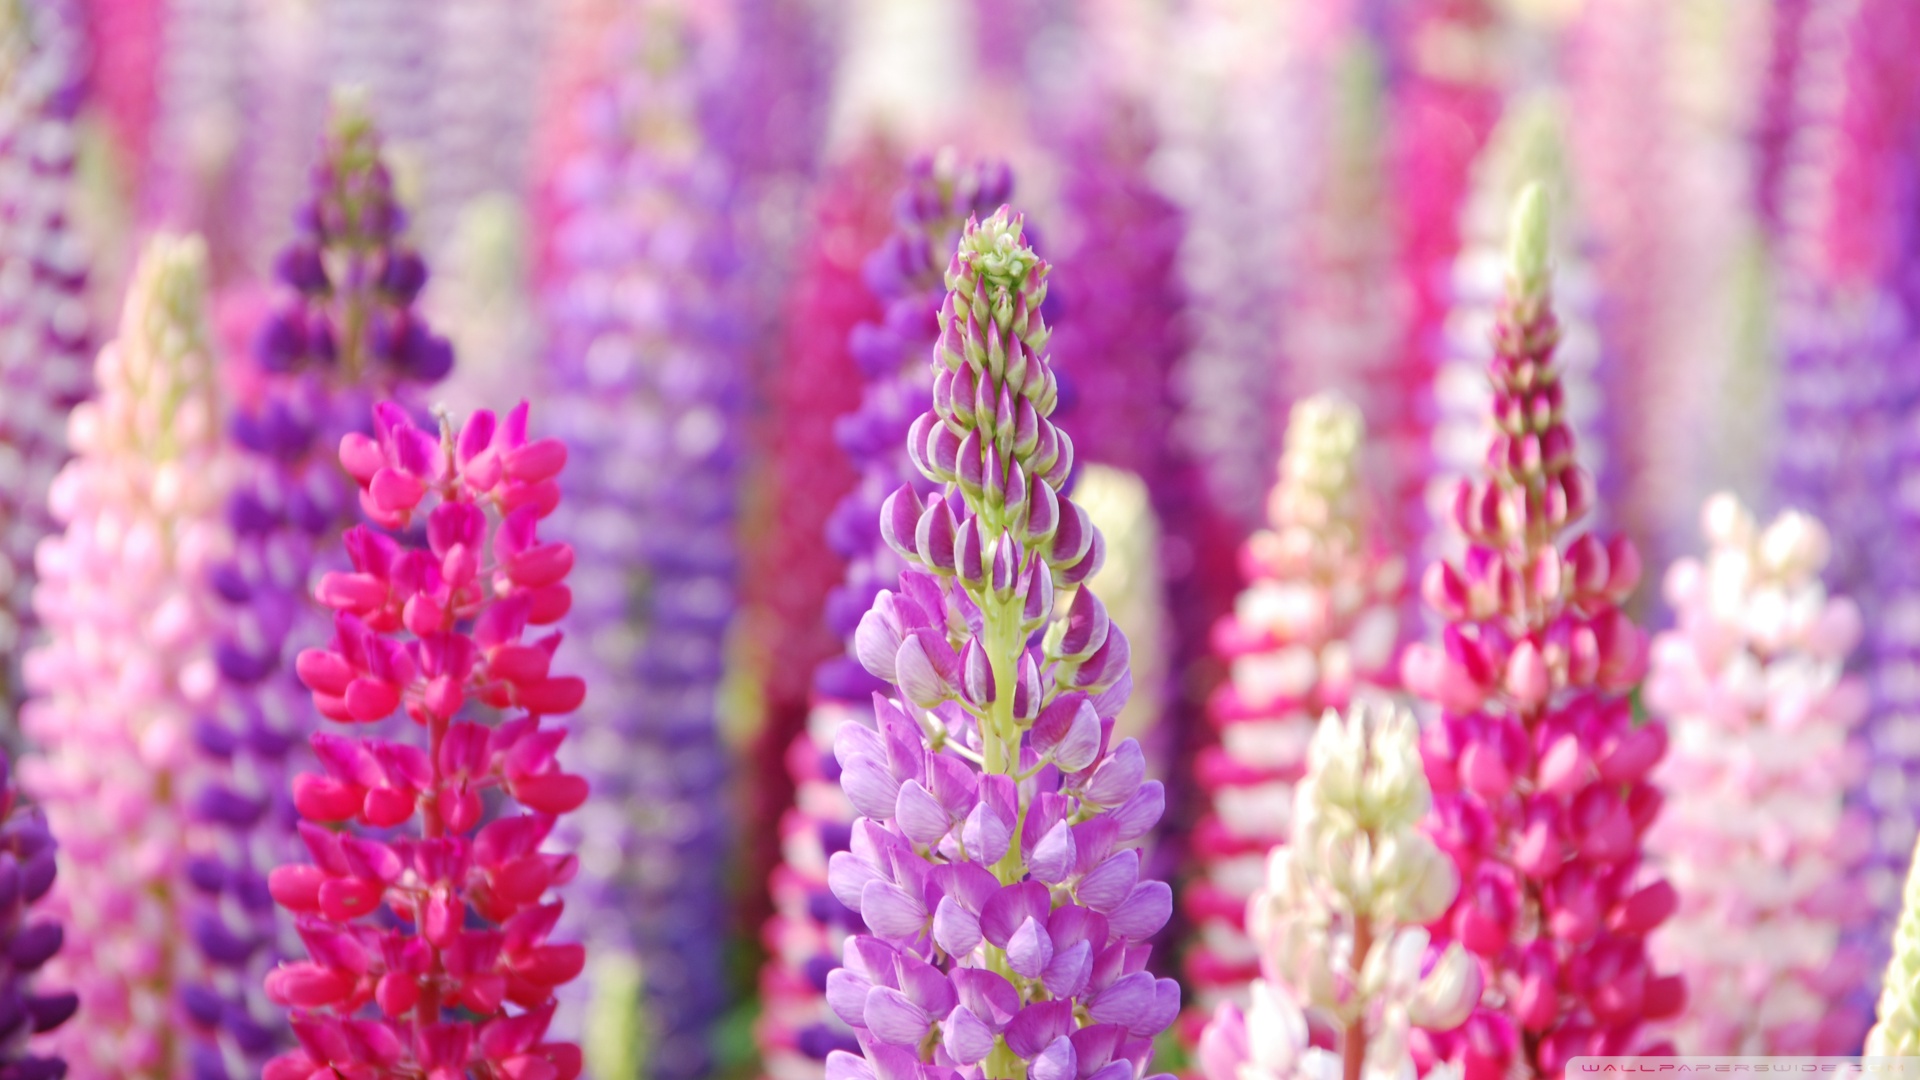 Pink And Purple Lupin Flowers Wallpaper 1920x1080 Pink And Purple